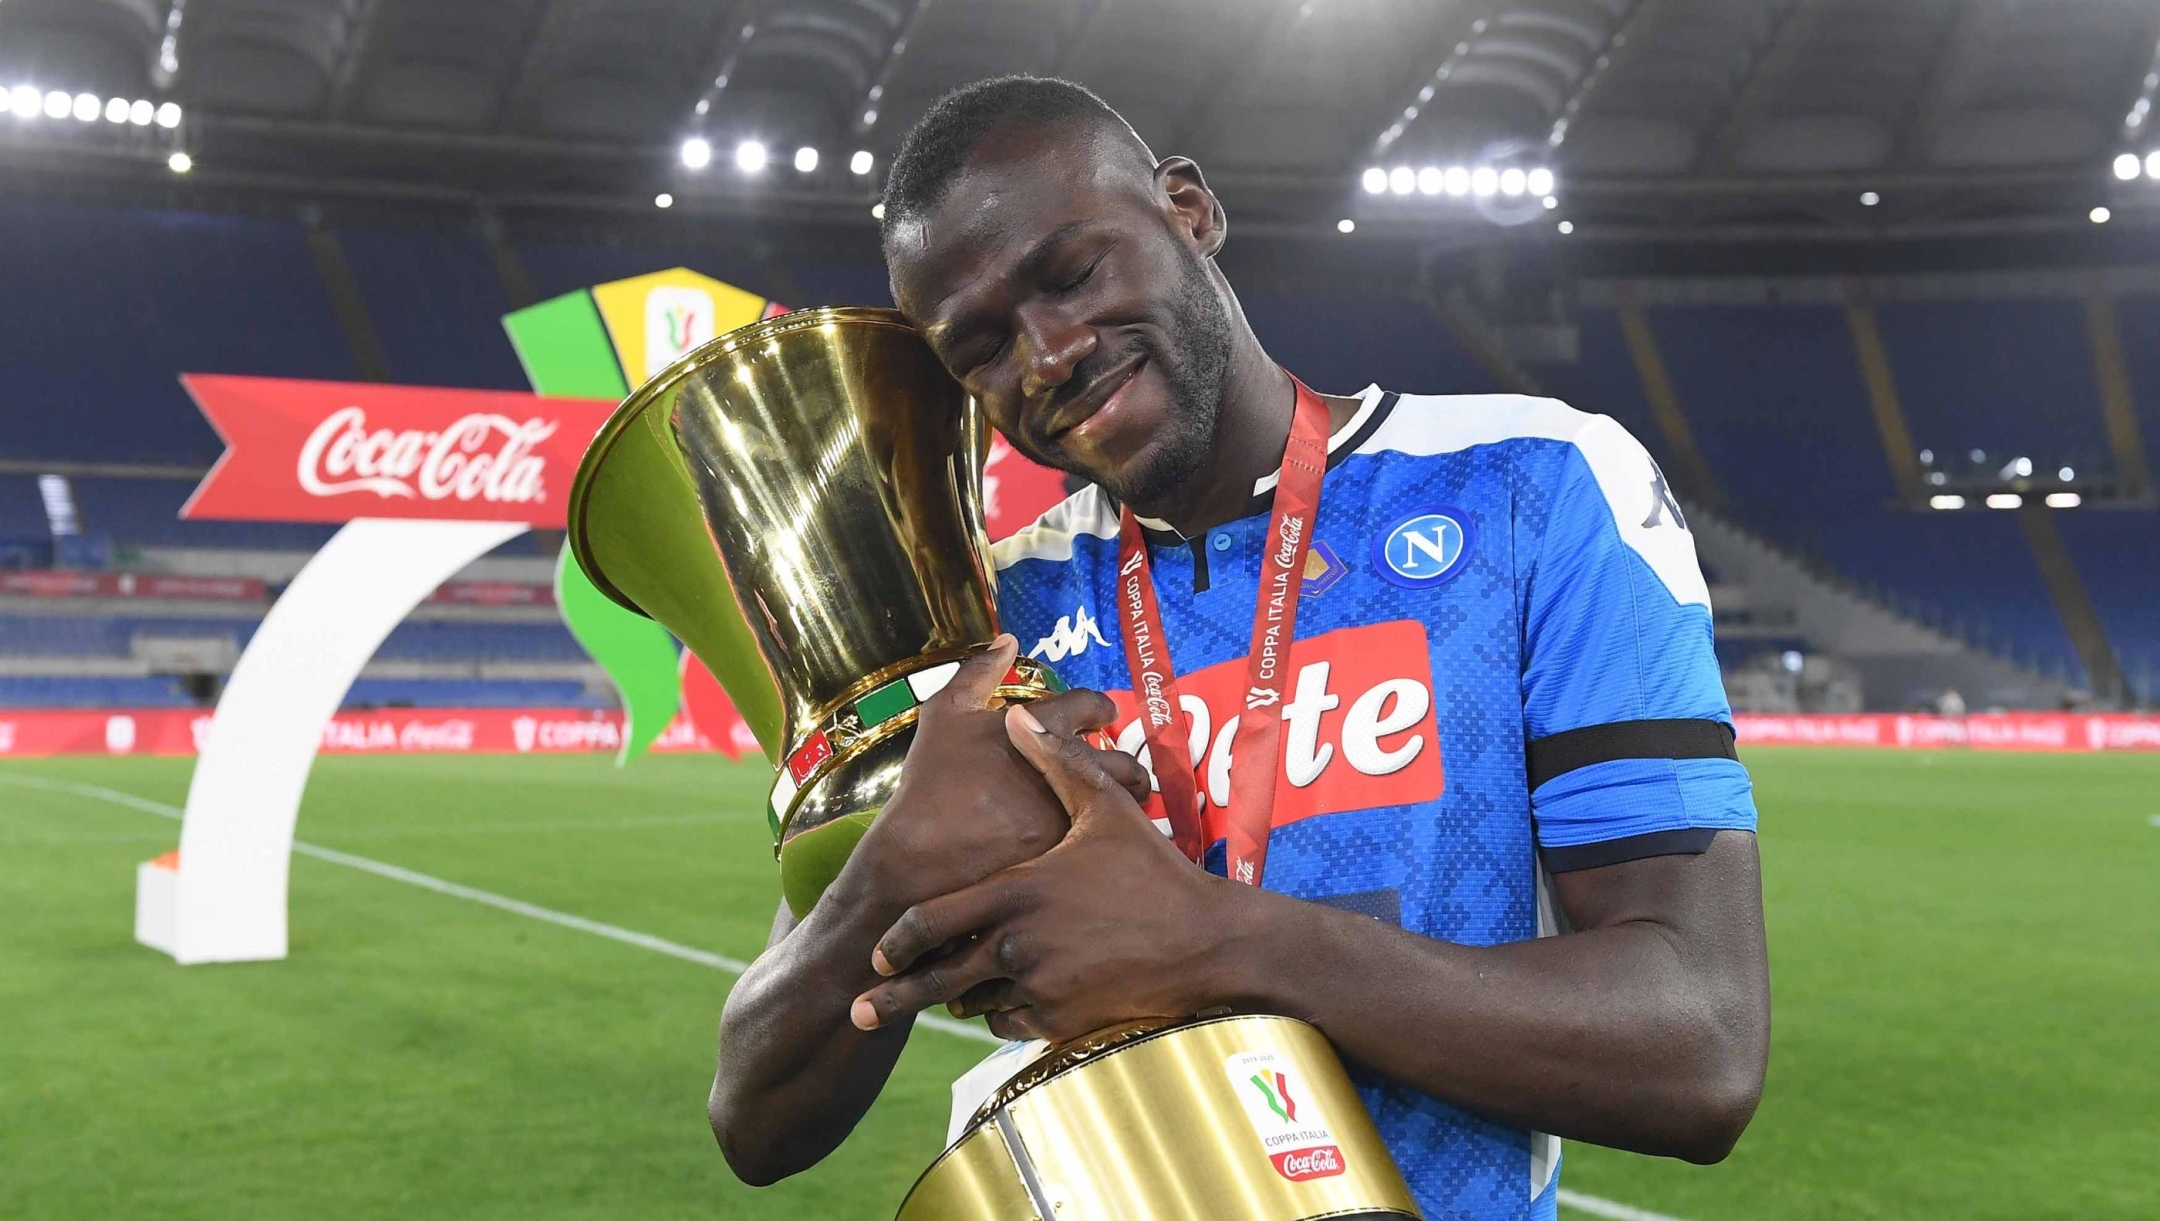 ROME, ITALY - JUNE 17: Kalidou Koulibaly of SSC Napoli reacts with the trophy after the Coppa Italia Final match between Juventus and SSC Napoli winner at Olimpico Stadium on June 17, 2020 in Rome, Italy.  (Photo by SSC NAPOLI/SSC NAPOLI via Getty Images)